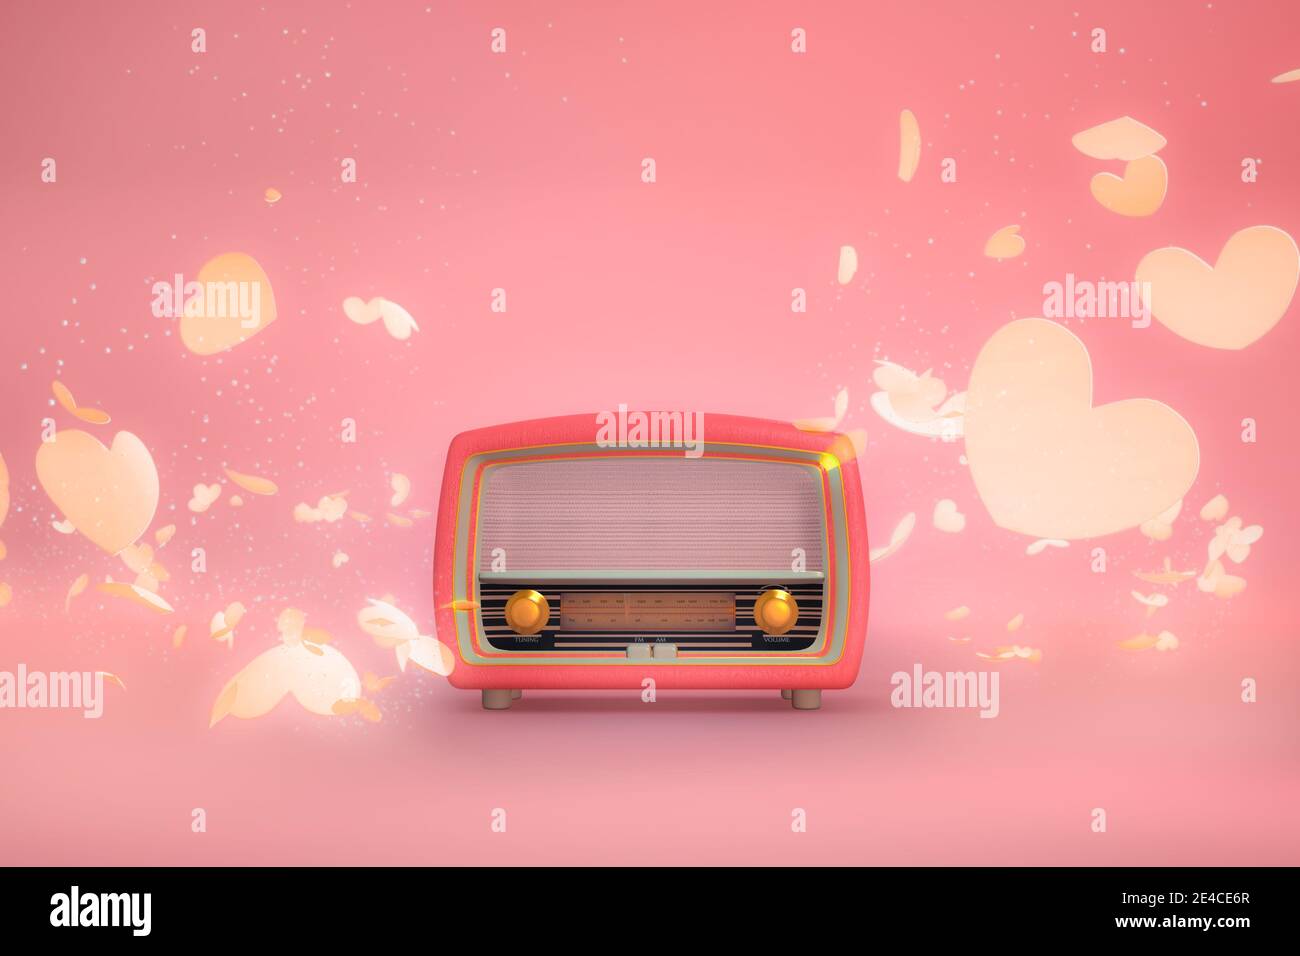 3D Rendering of a Pink Vintage Radio Receiver with Translucent Heart Shapes Stock Photo